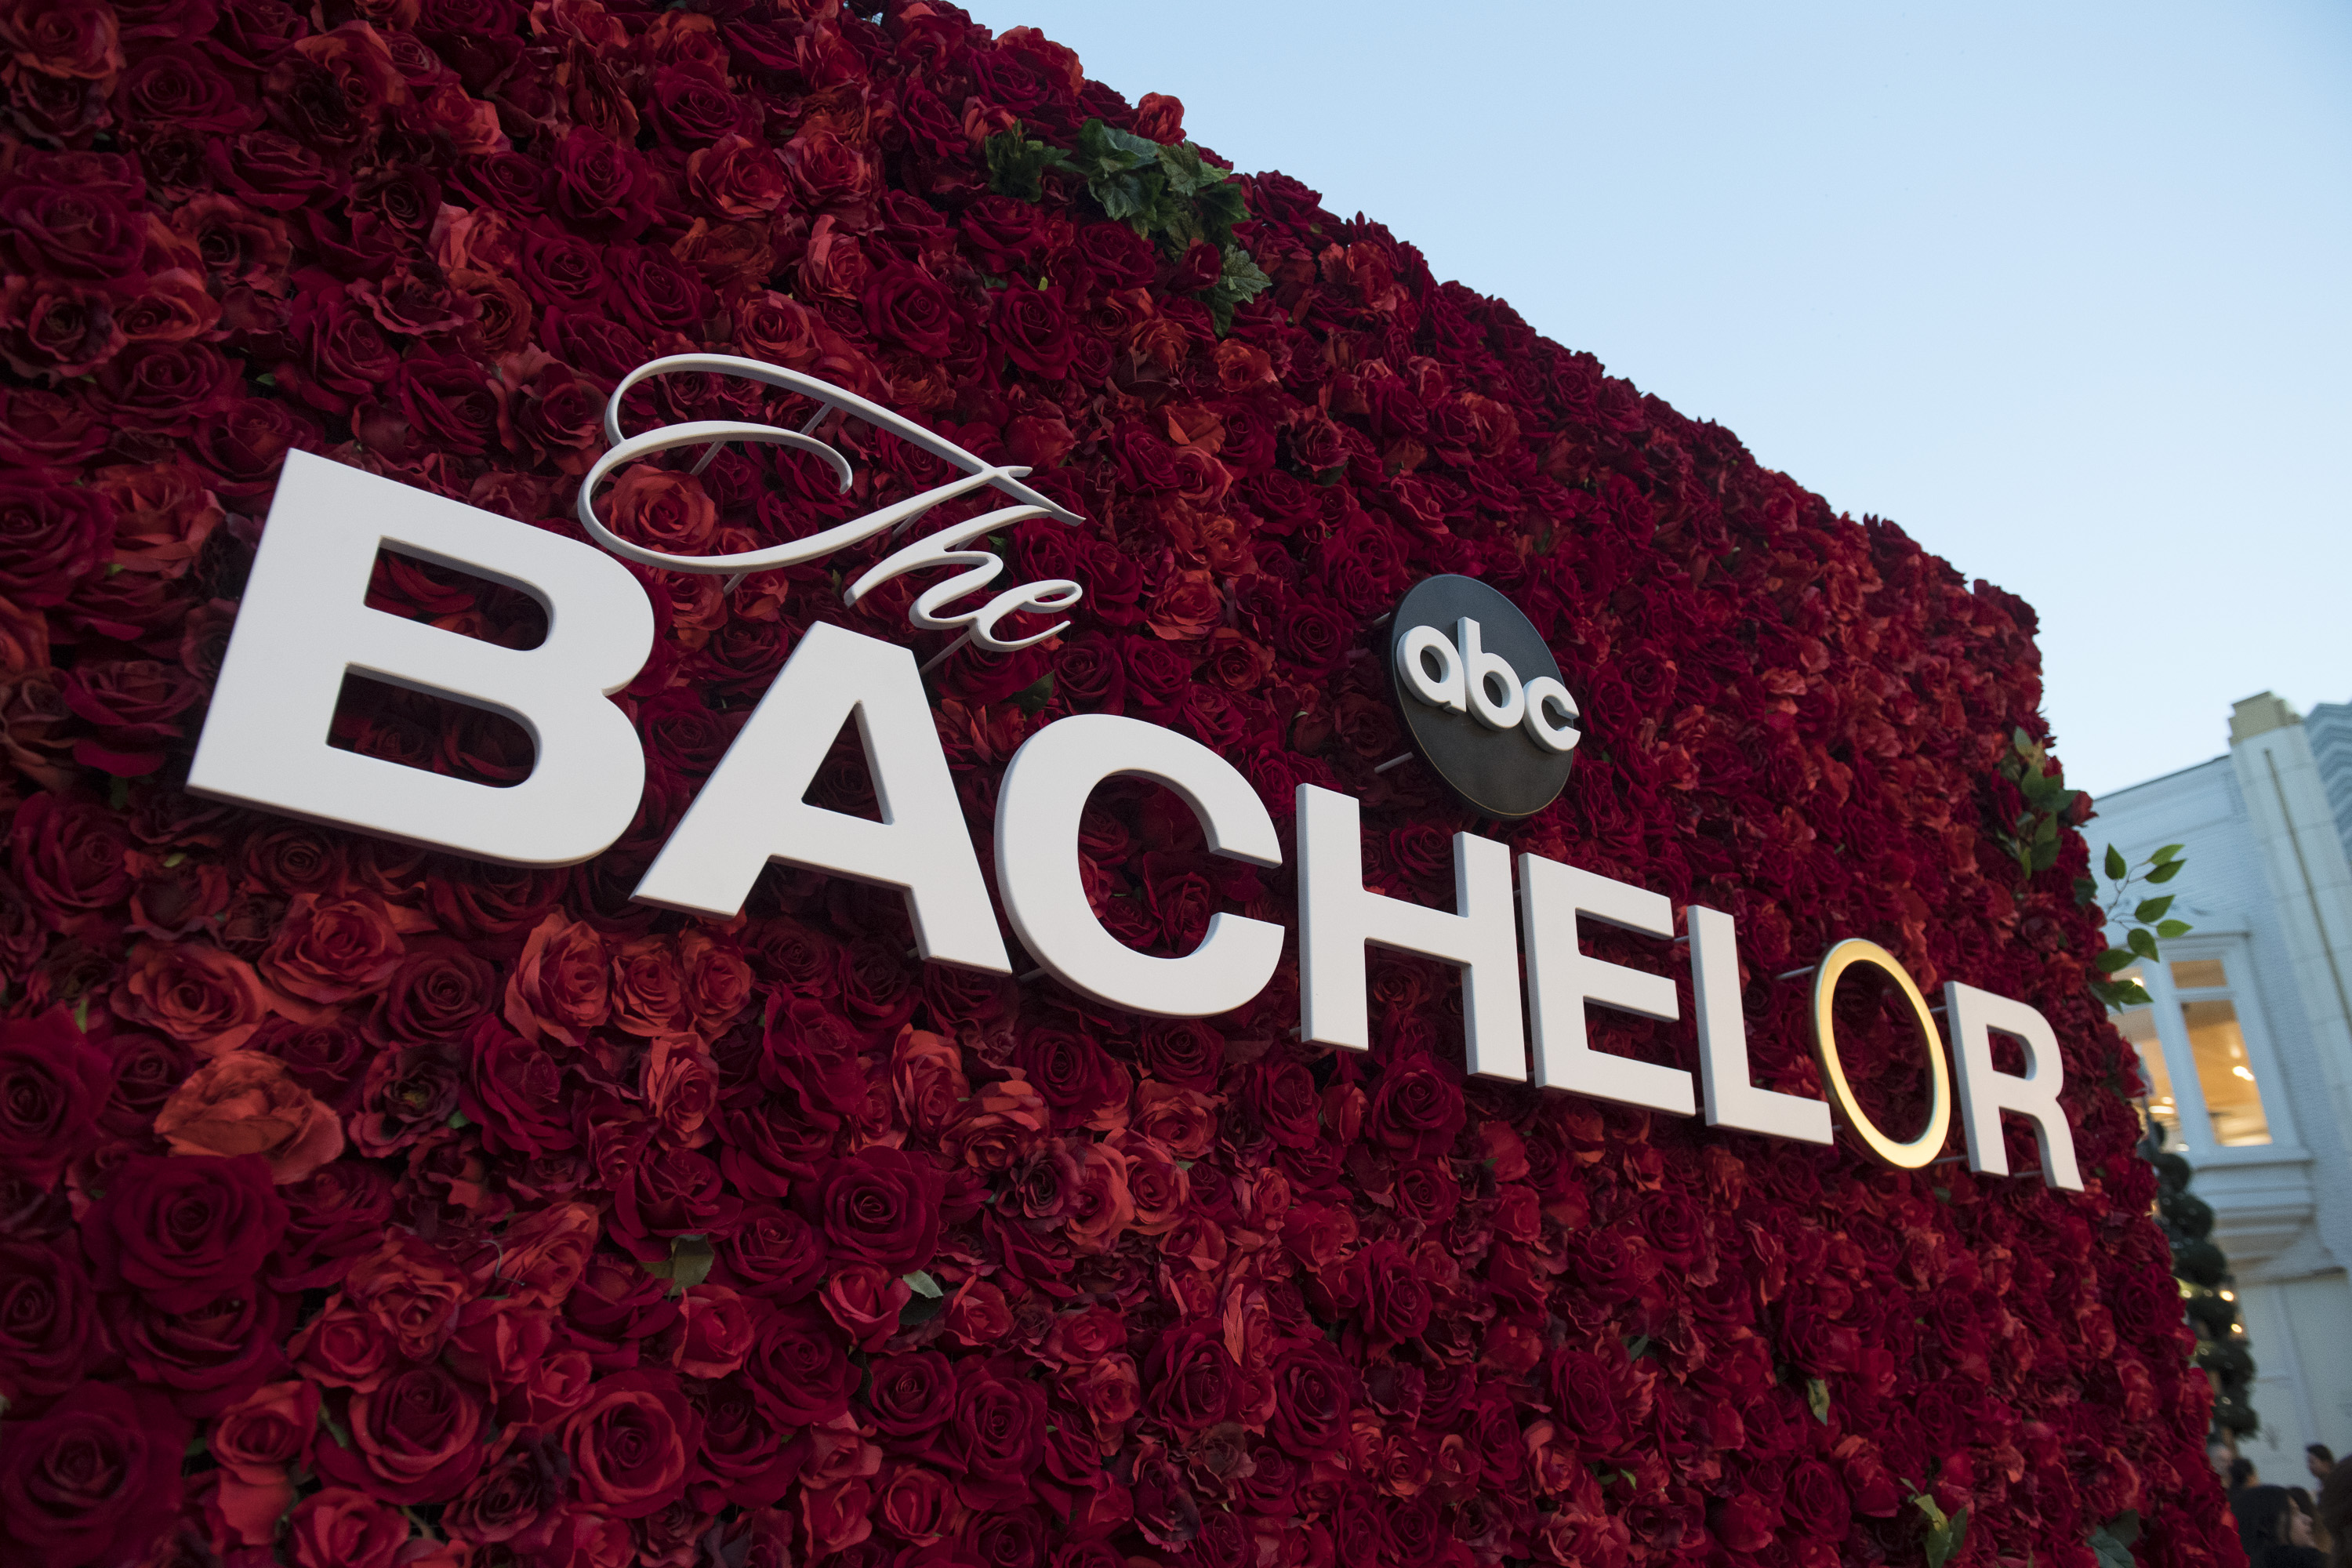 The logo of ABC's "The Bachelor" season 23 placed in front of red roses on January 4, 2019 | Source: Getty Images